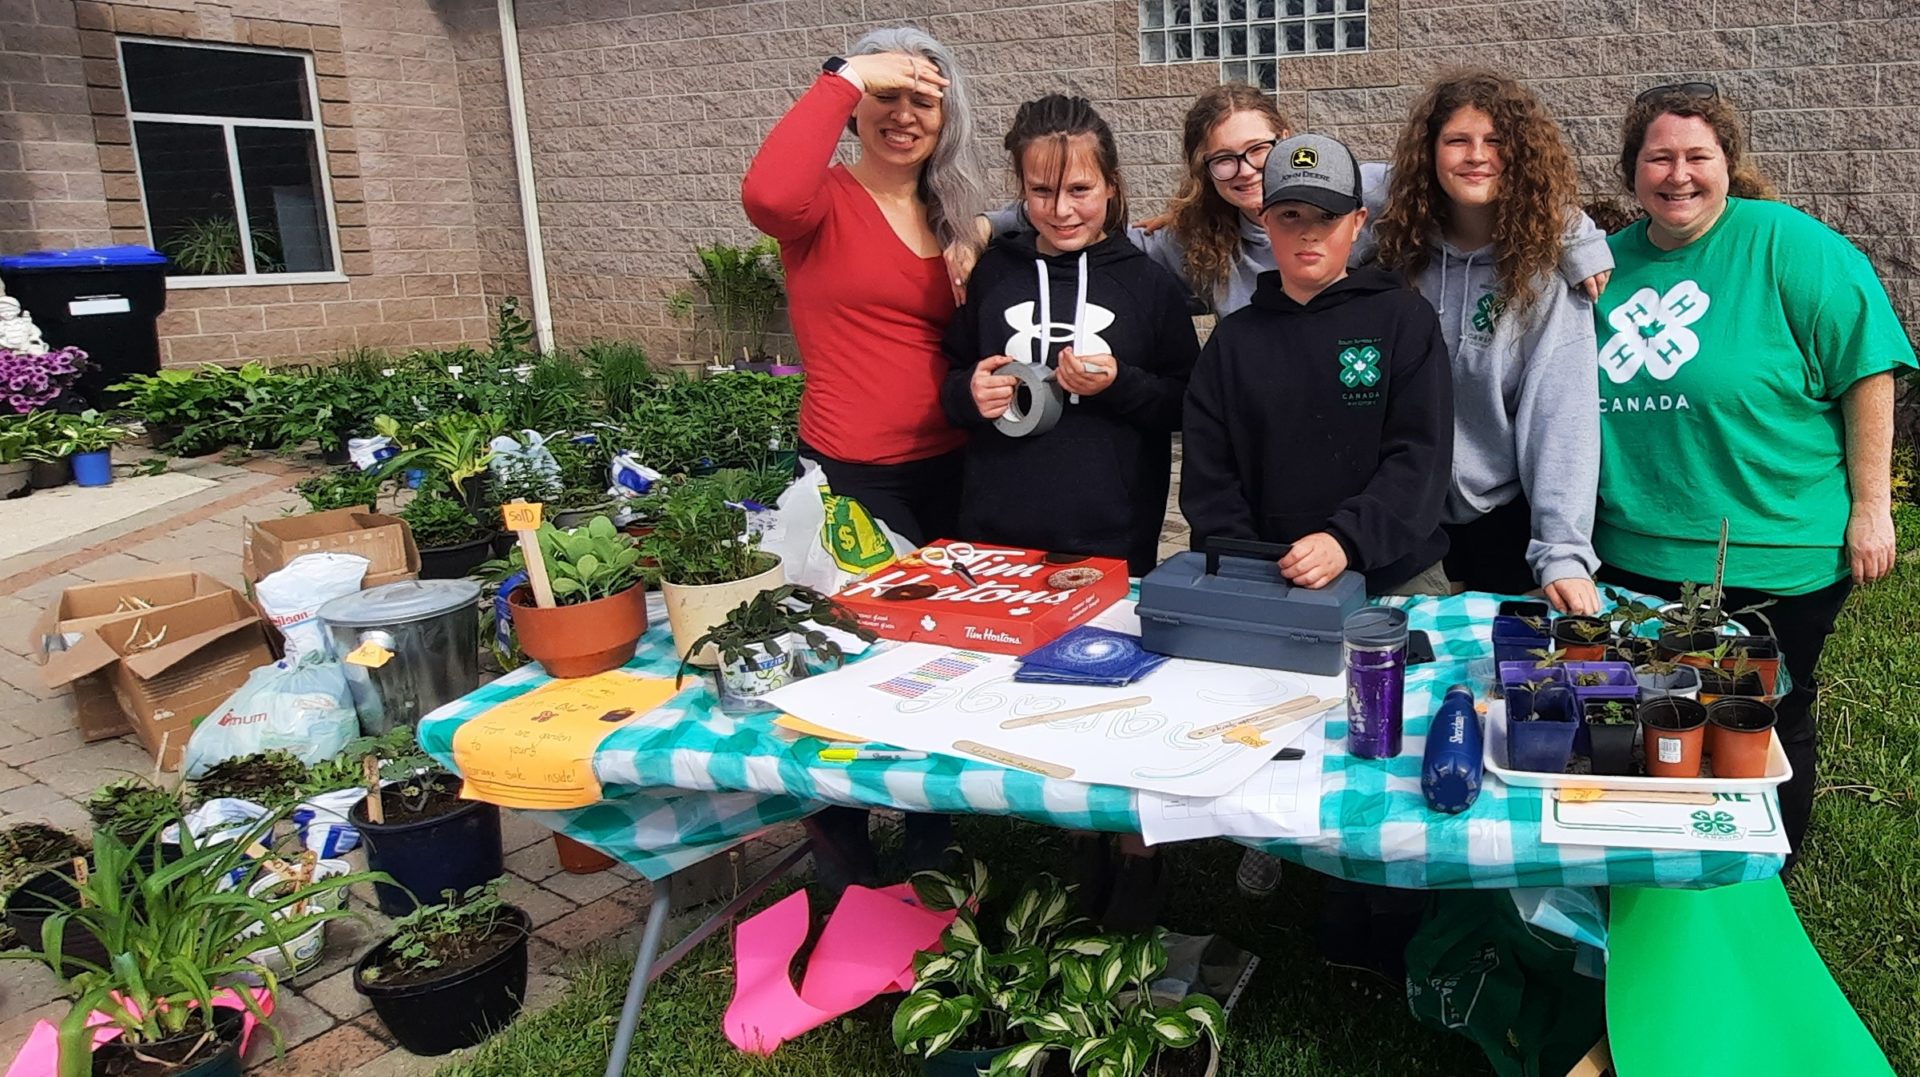 Members raising club funds by selling plants